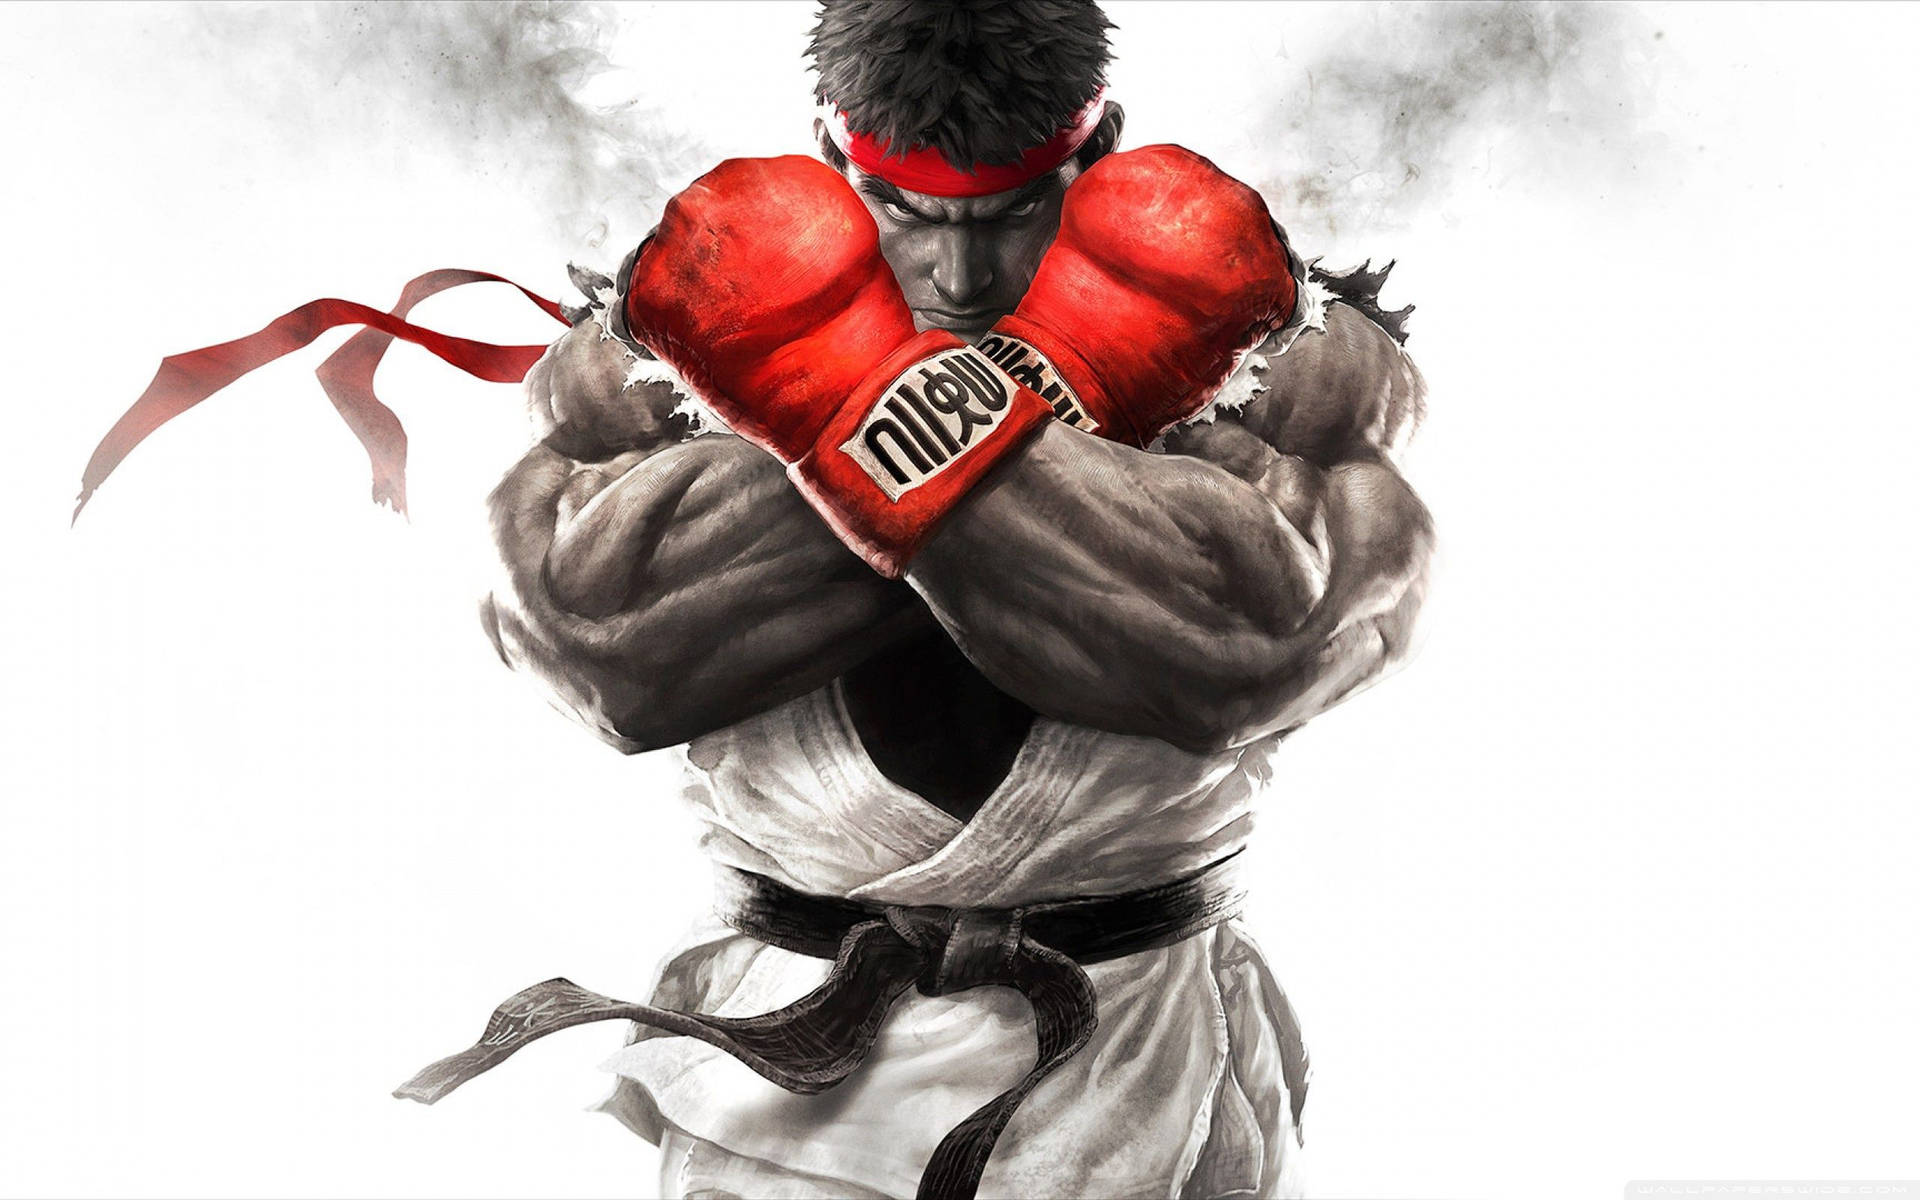 2560X1600 Street Fighter Wallpaper and Background